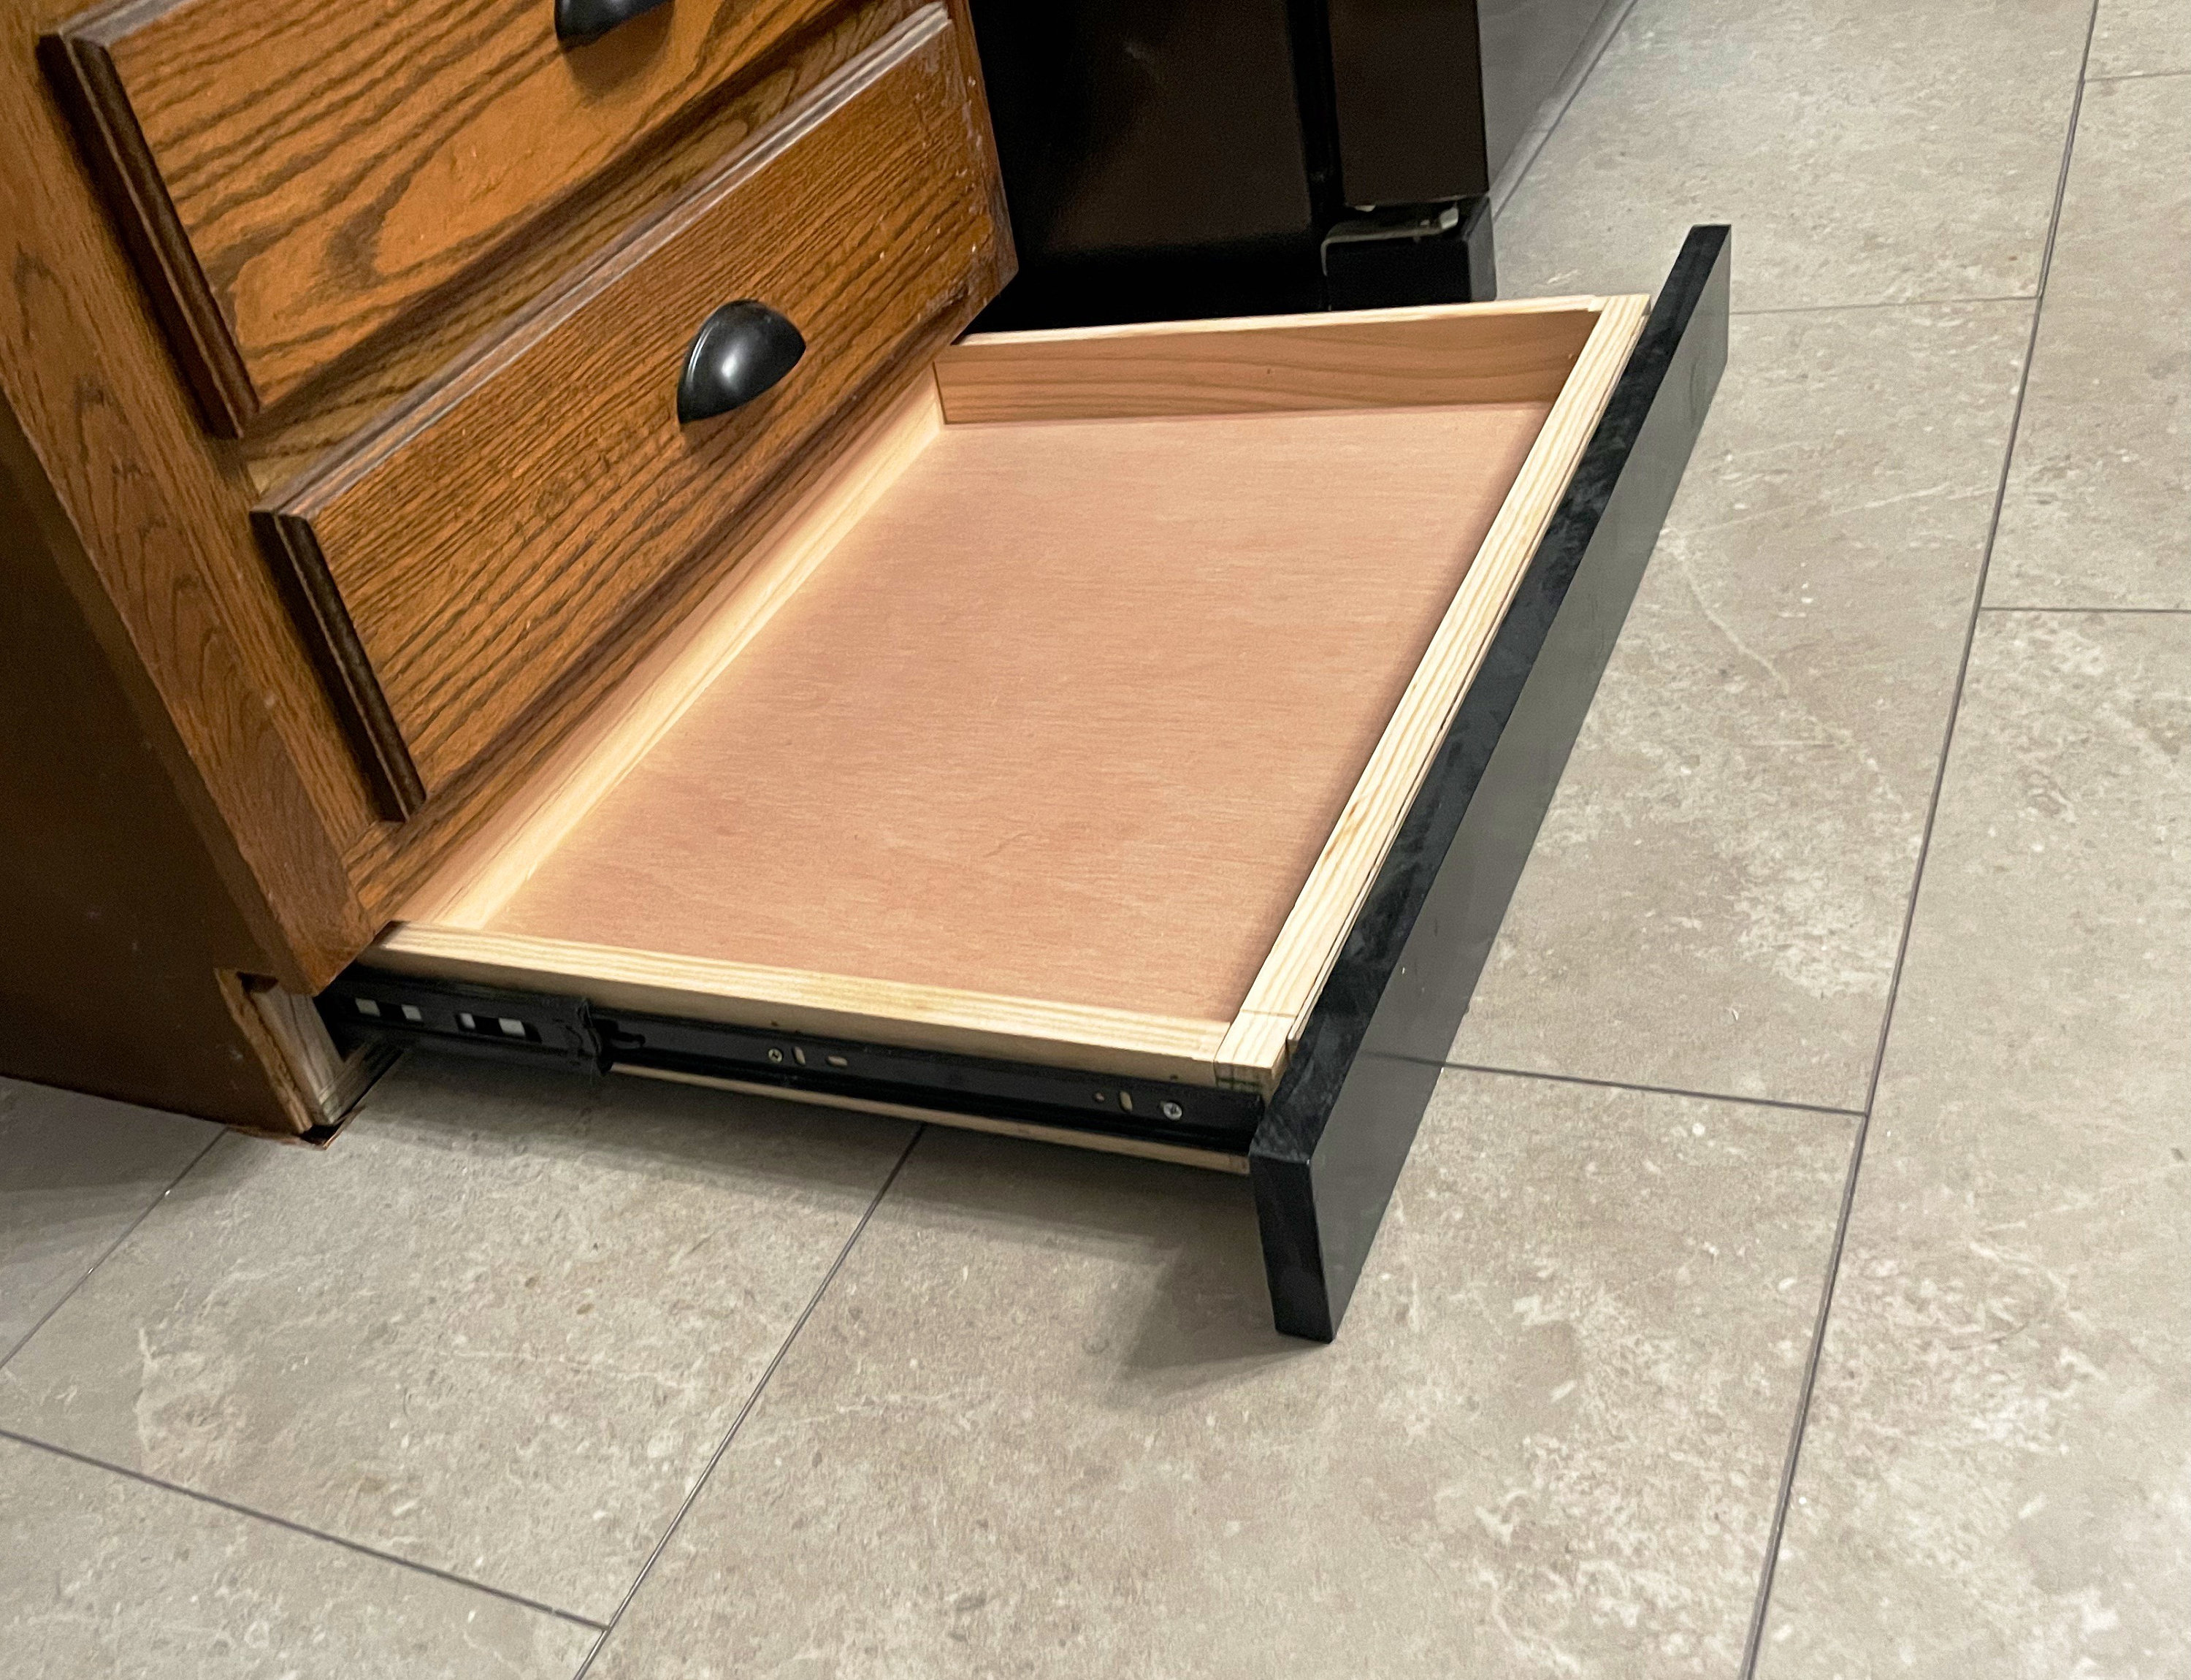 Why You Should Install Toe-Kick Drawers - PureWow